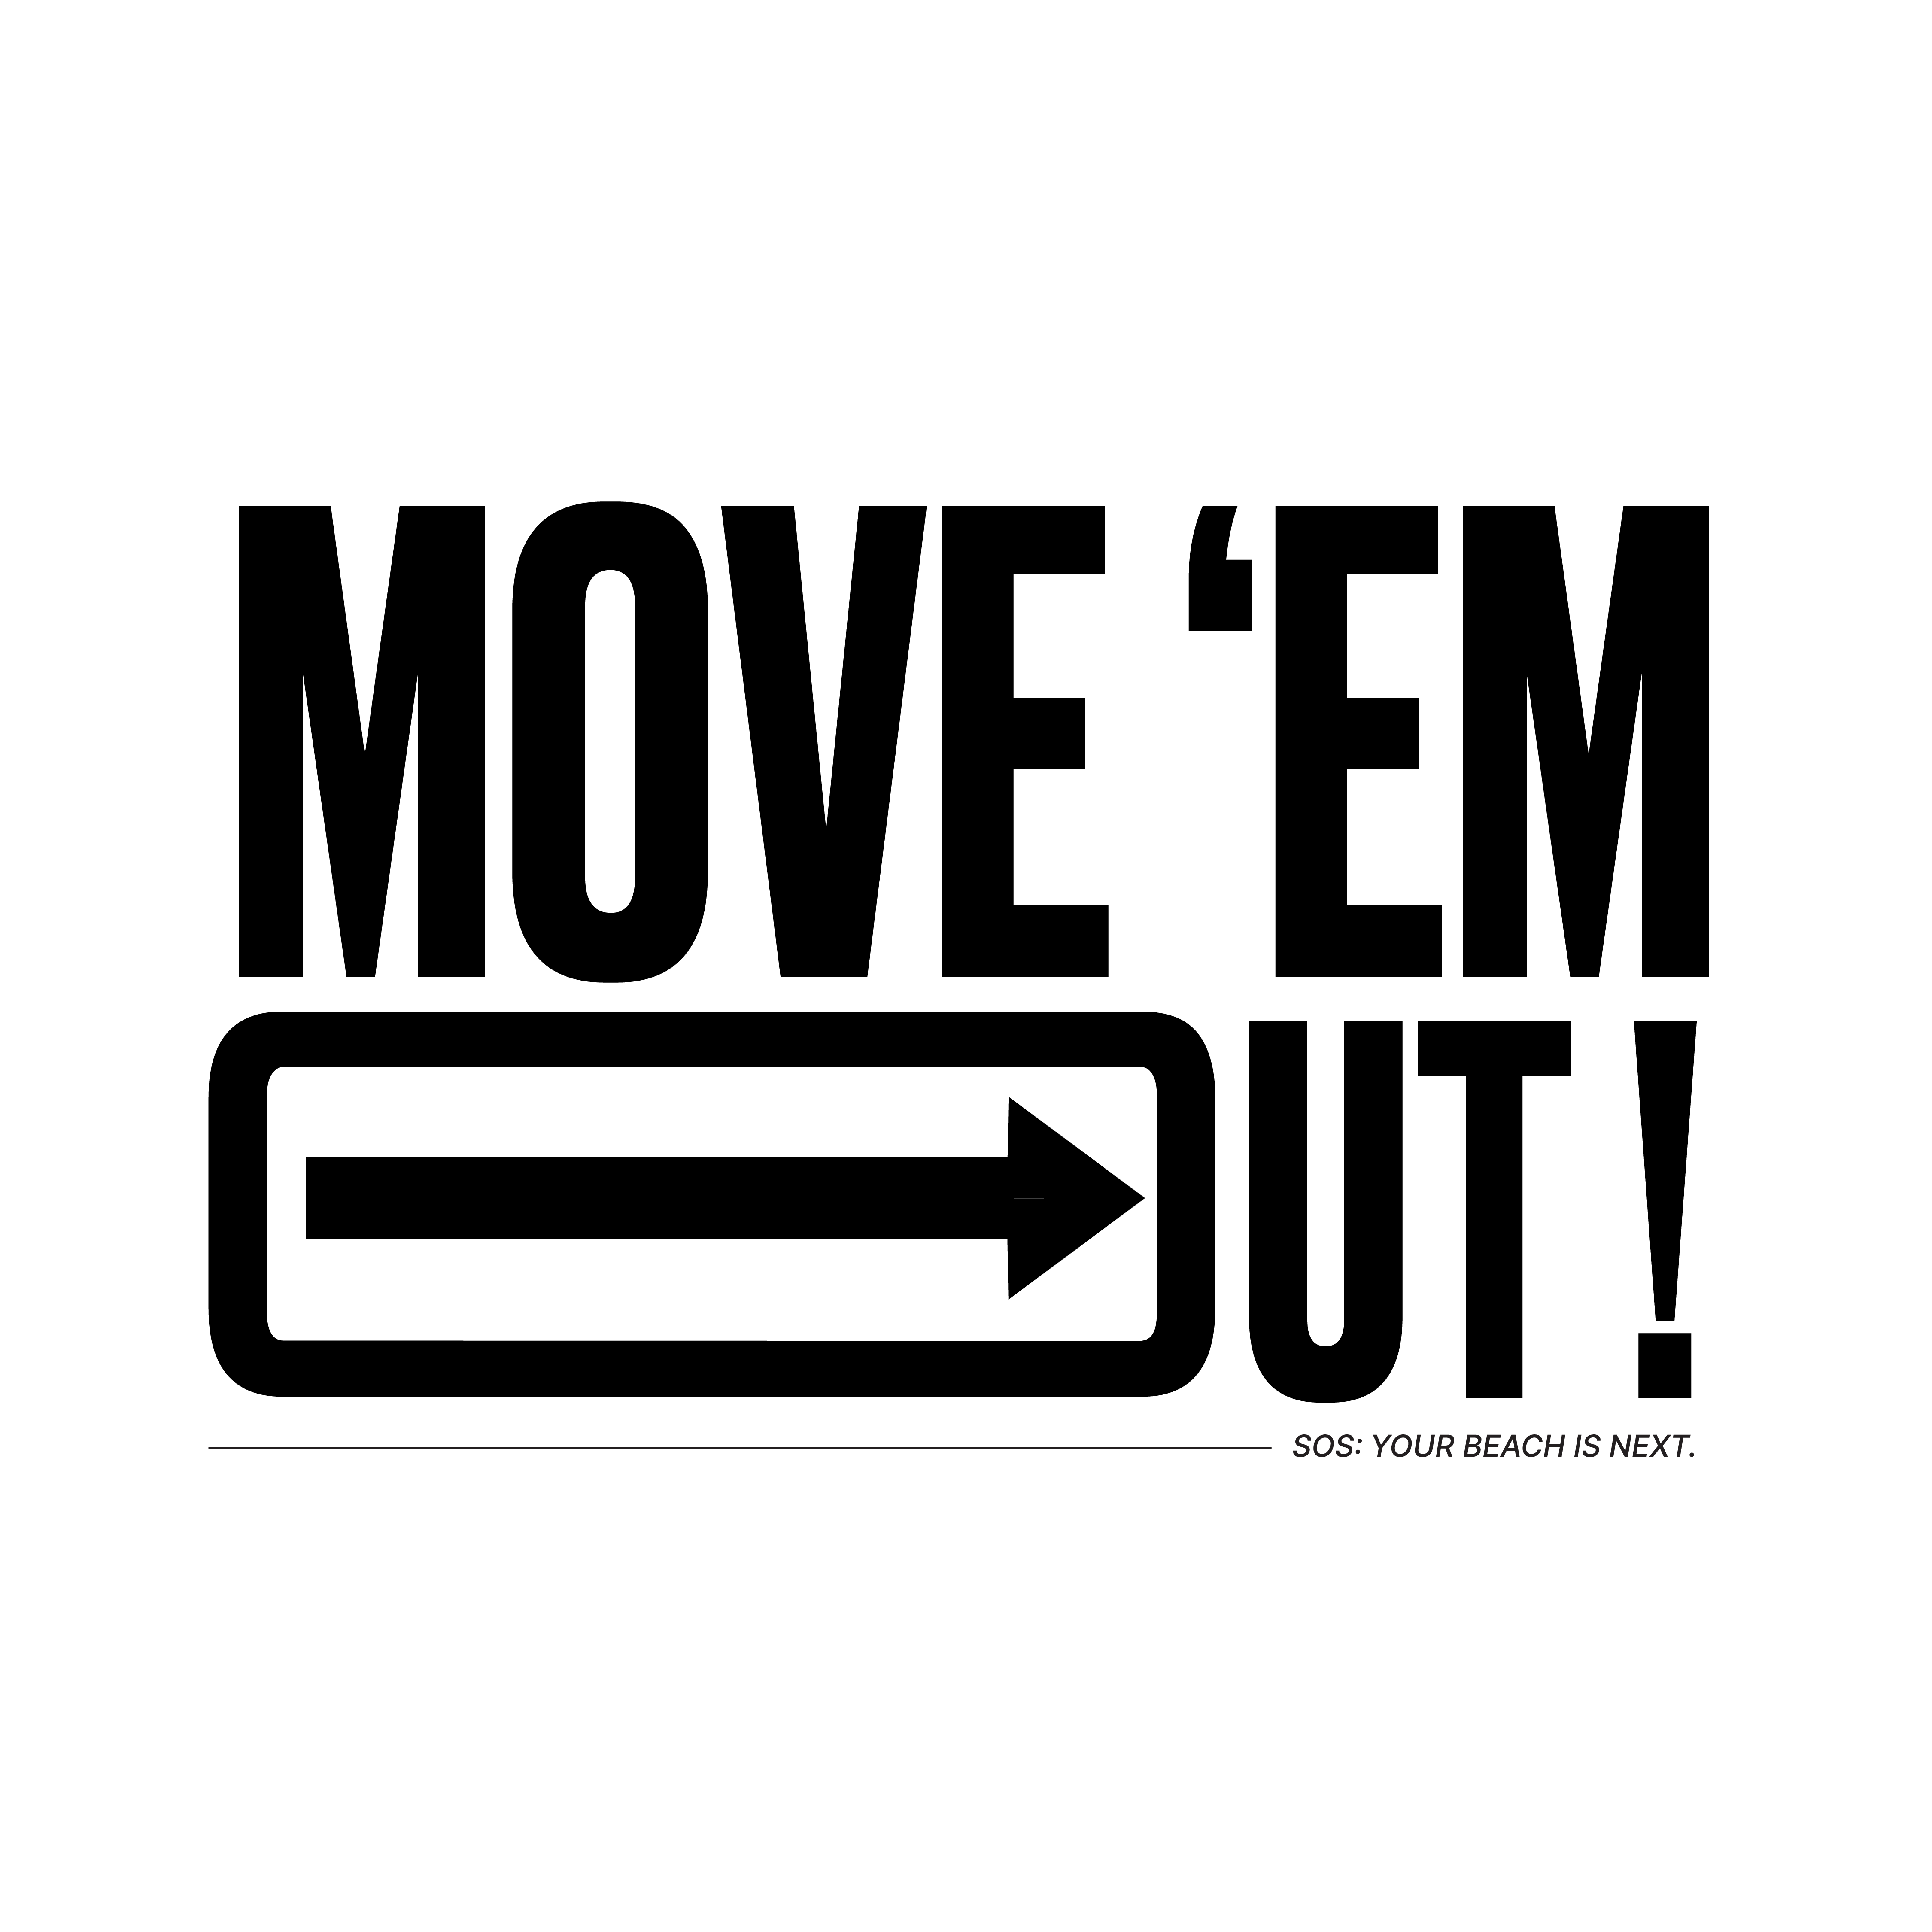 MOVE ‘EM OUT Supports Eight New Jersey Shore Towns' Lawsuit